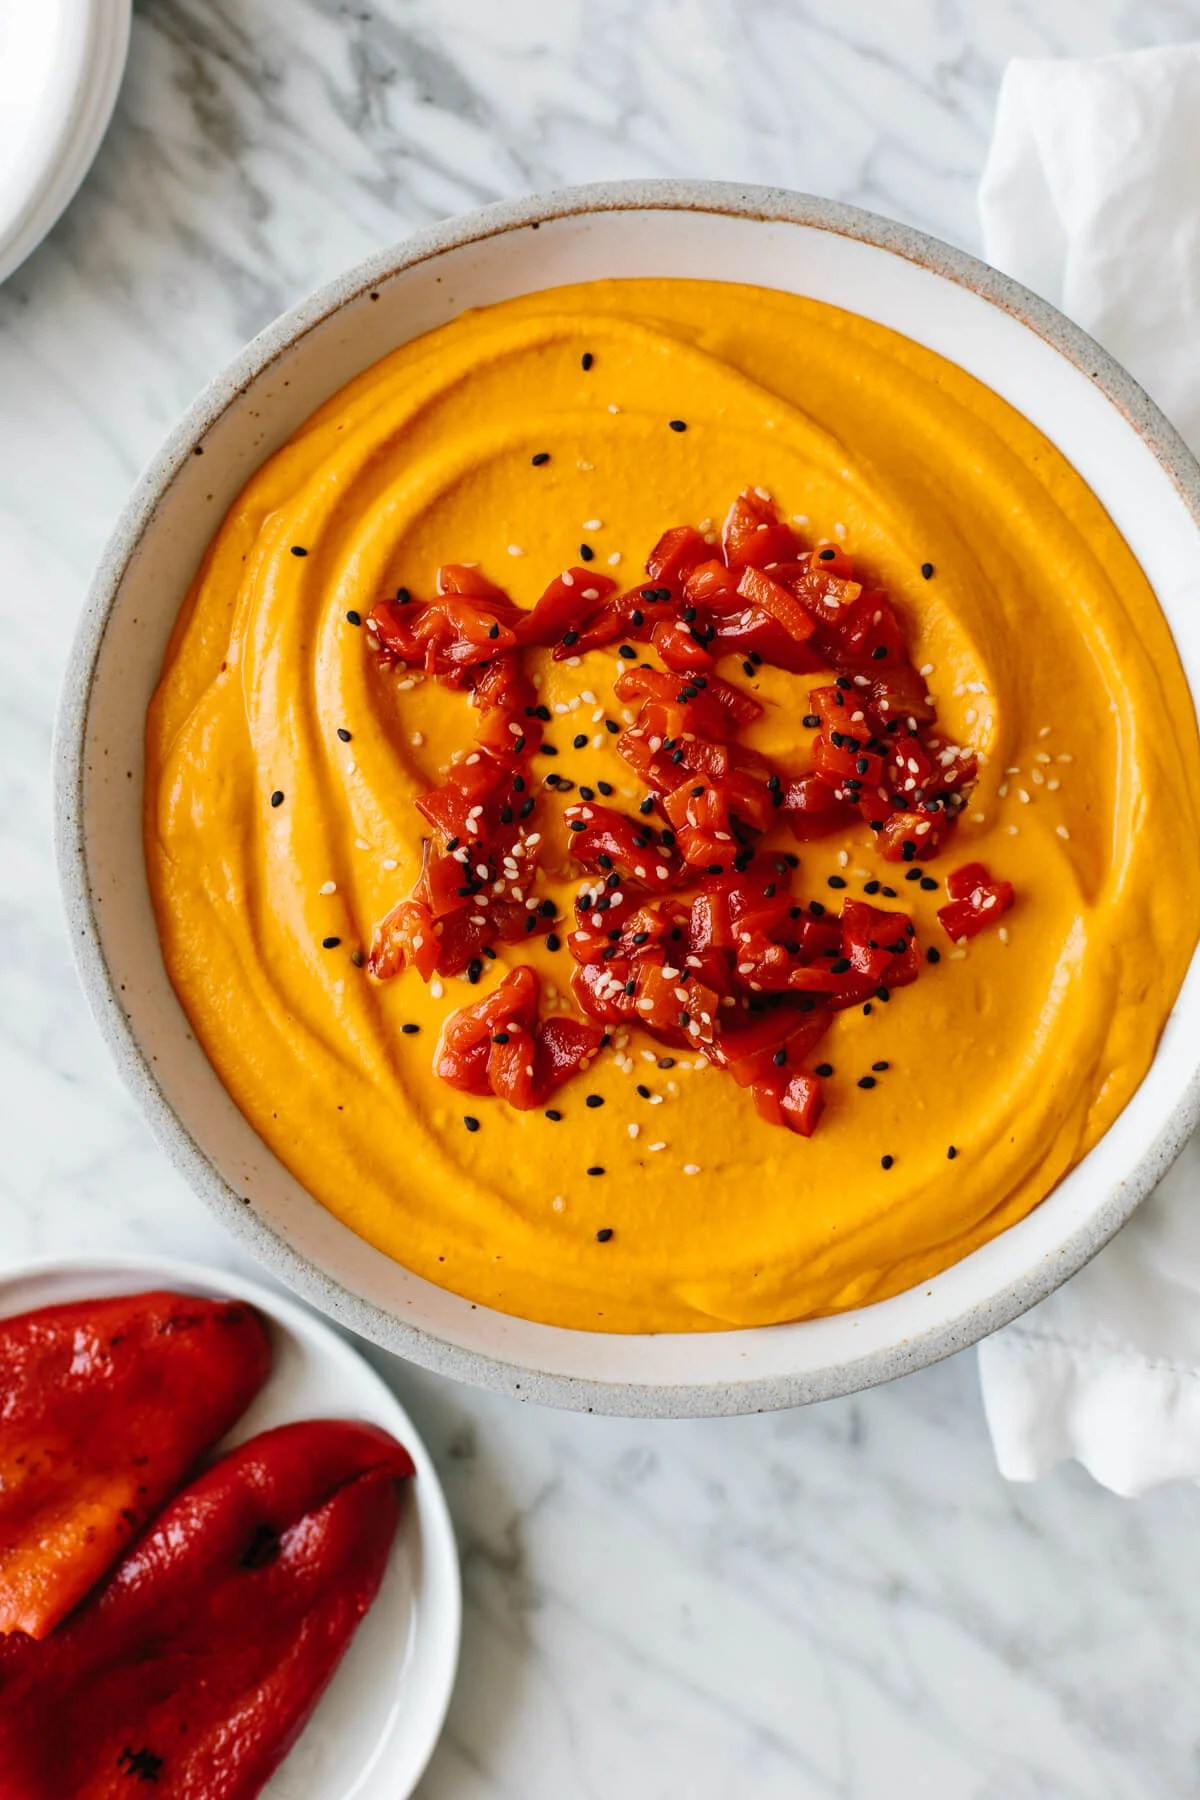 A bowl of roasted red pepper hummus.